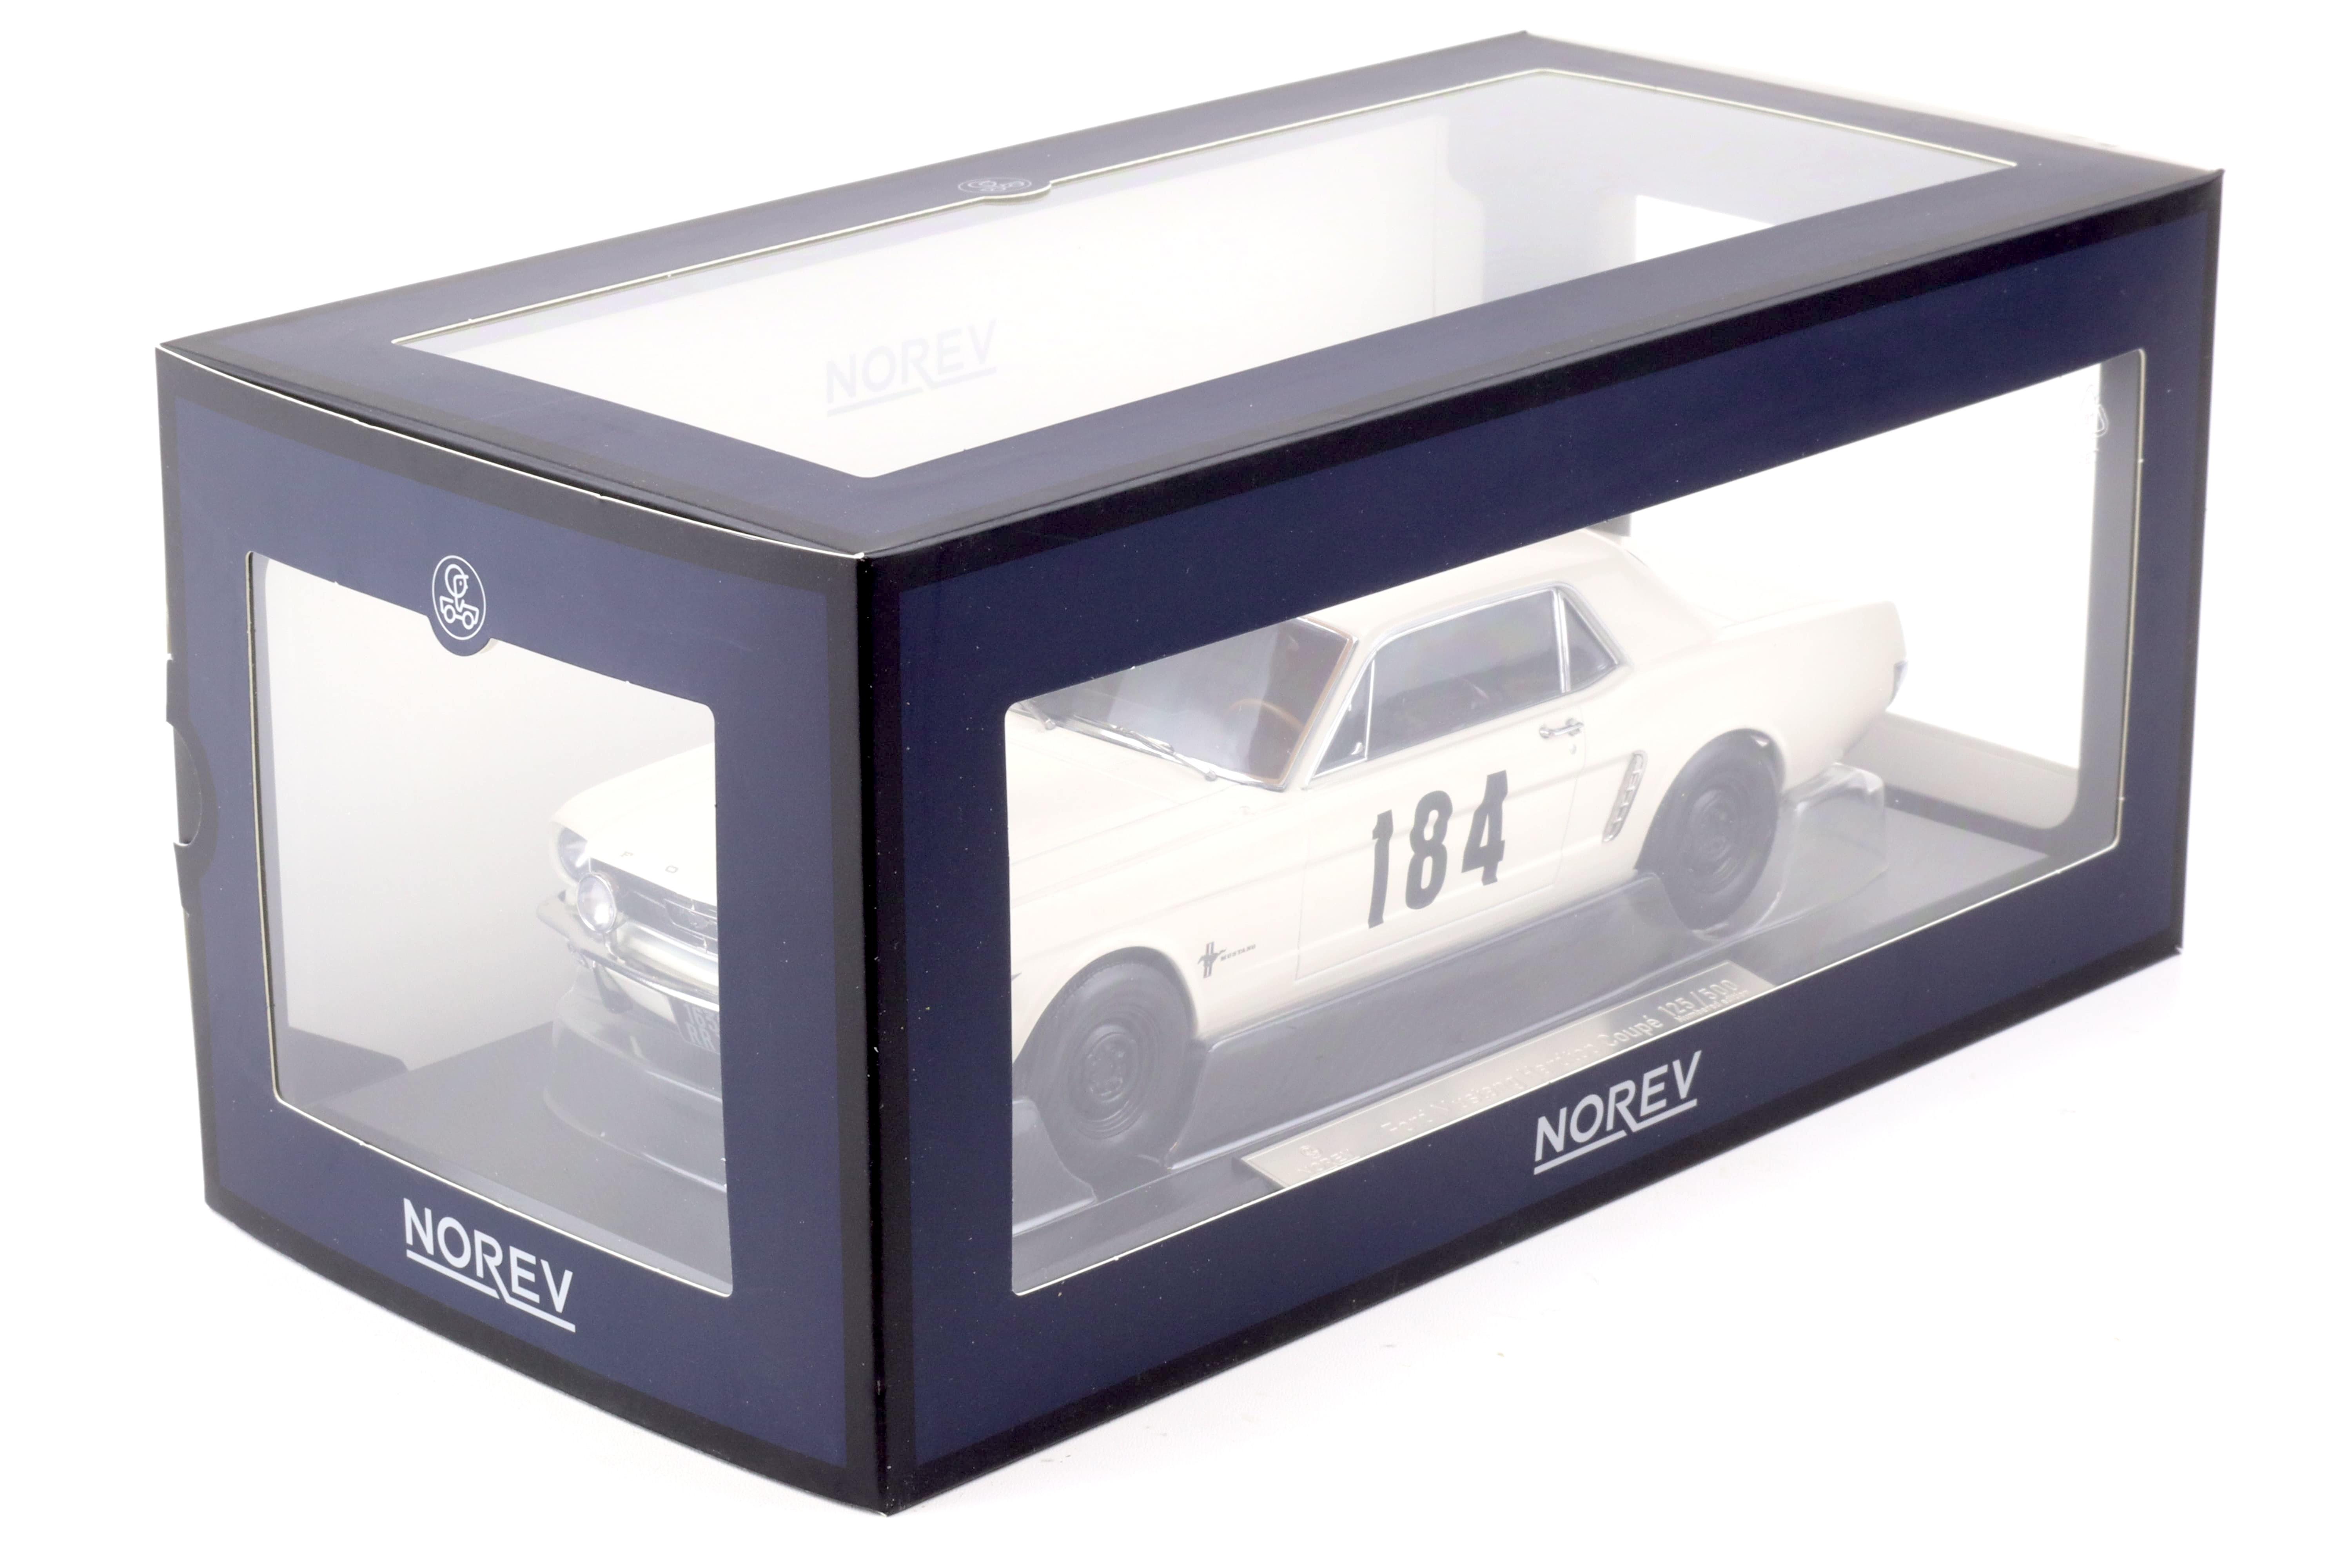 1:18 Norev Ford Mustang Hardtop Coupe 1965 Rally Monte Carlo #184 - Limited 500 pcs.